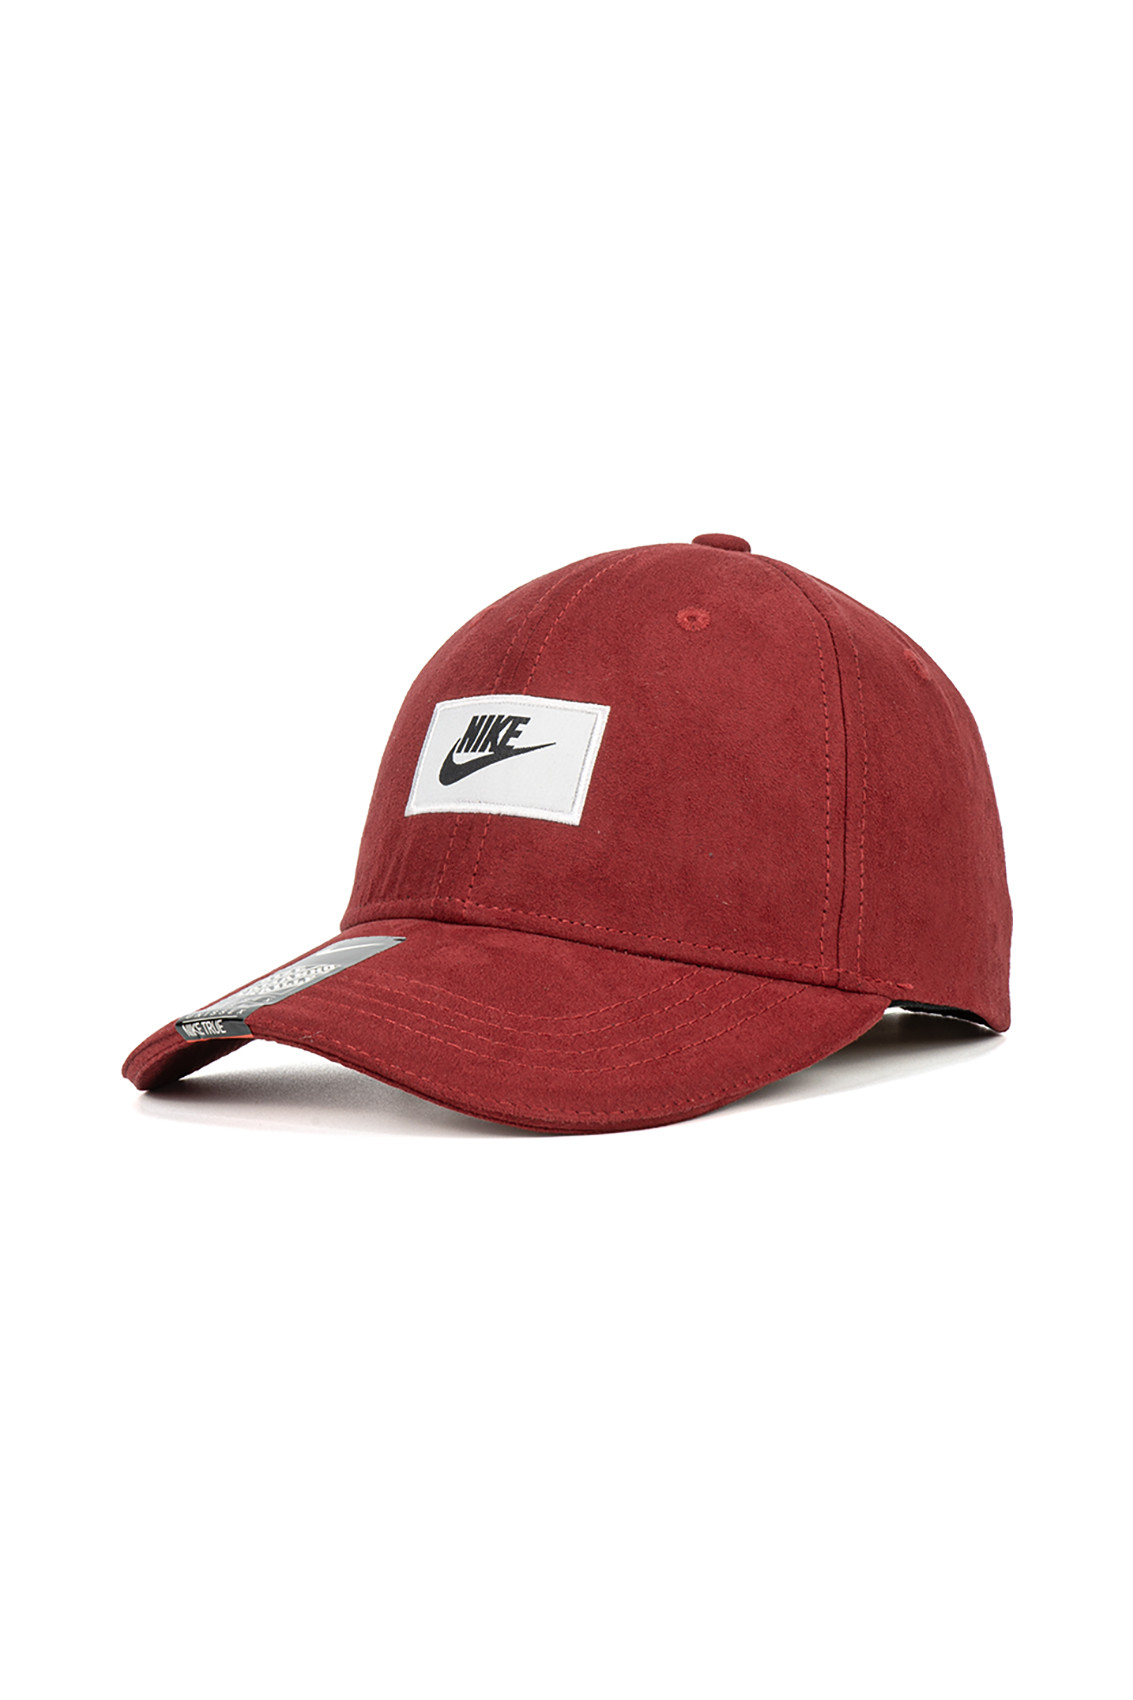 Casquette SMAIL, Rouge